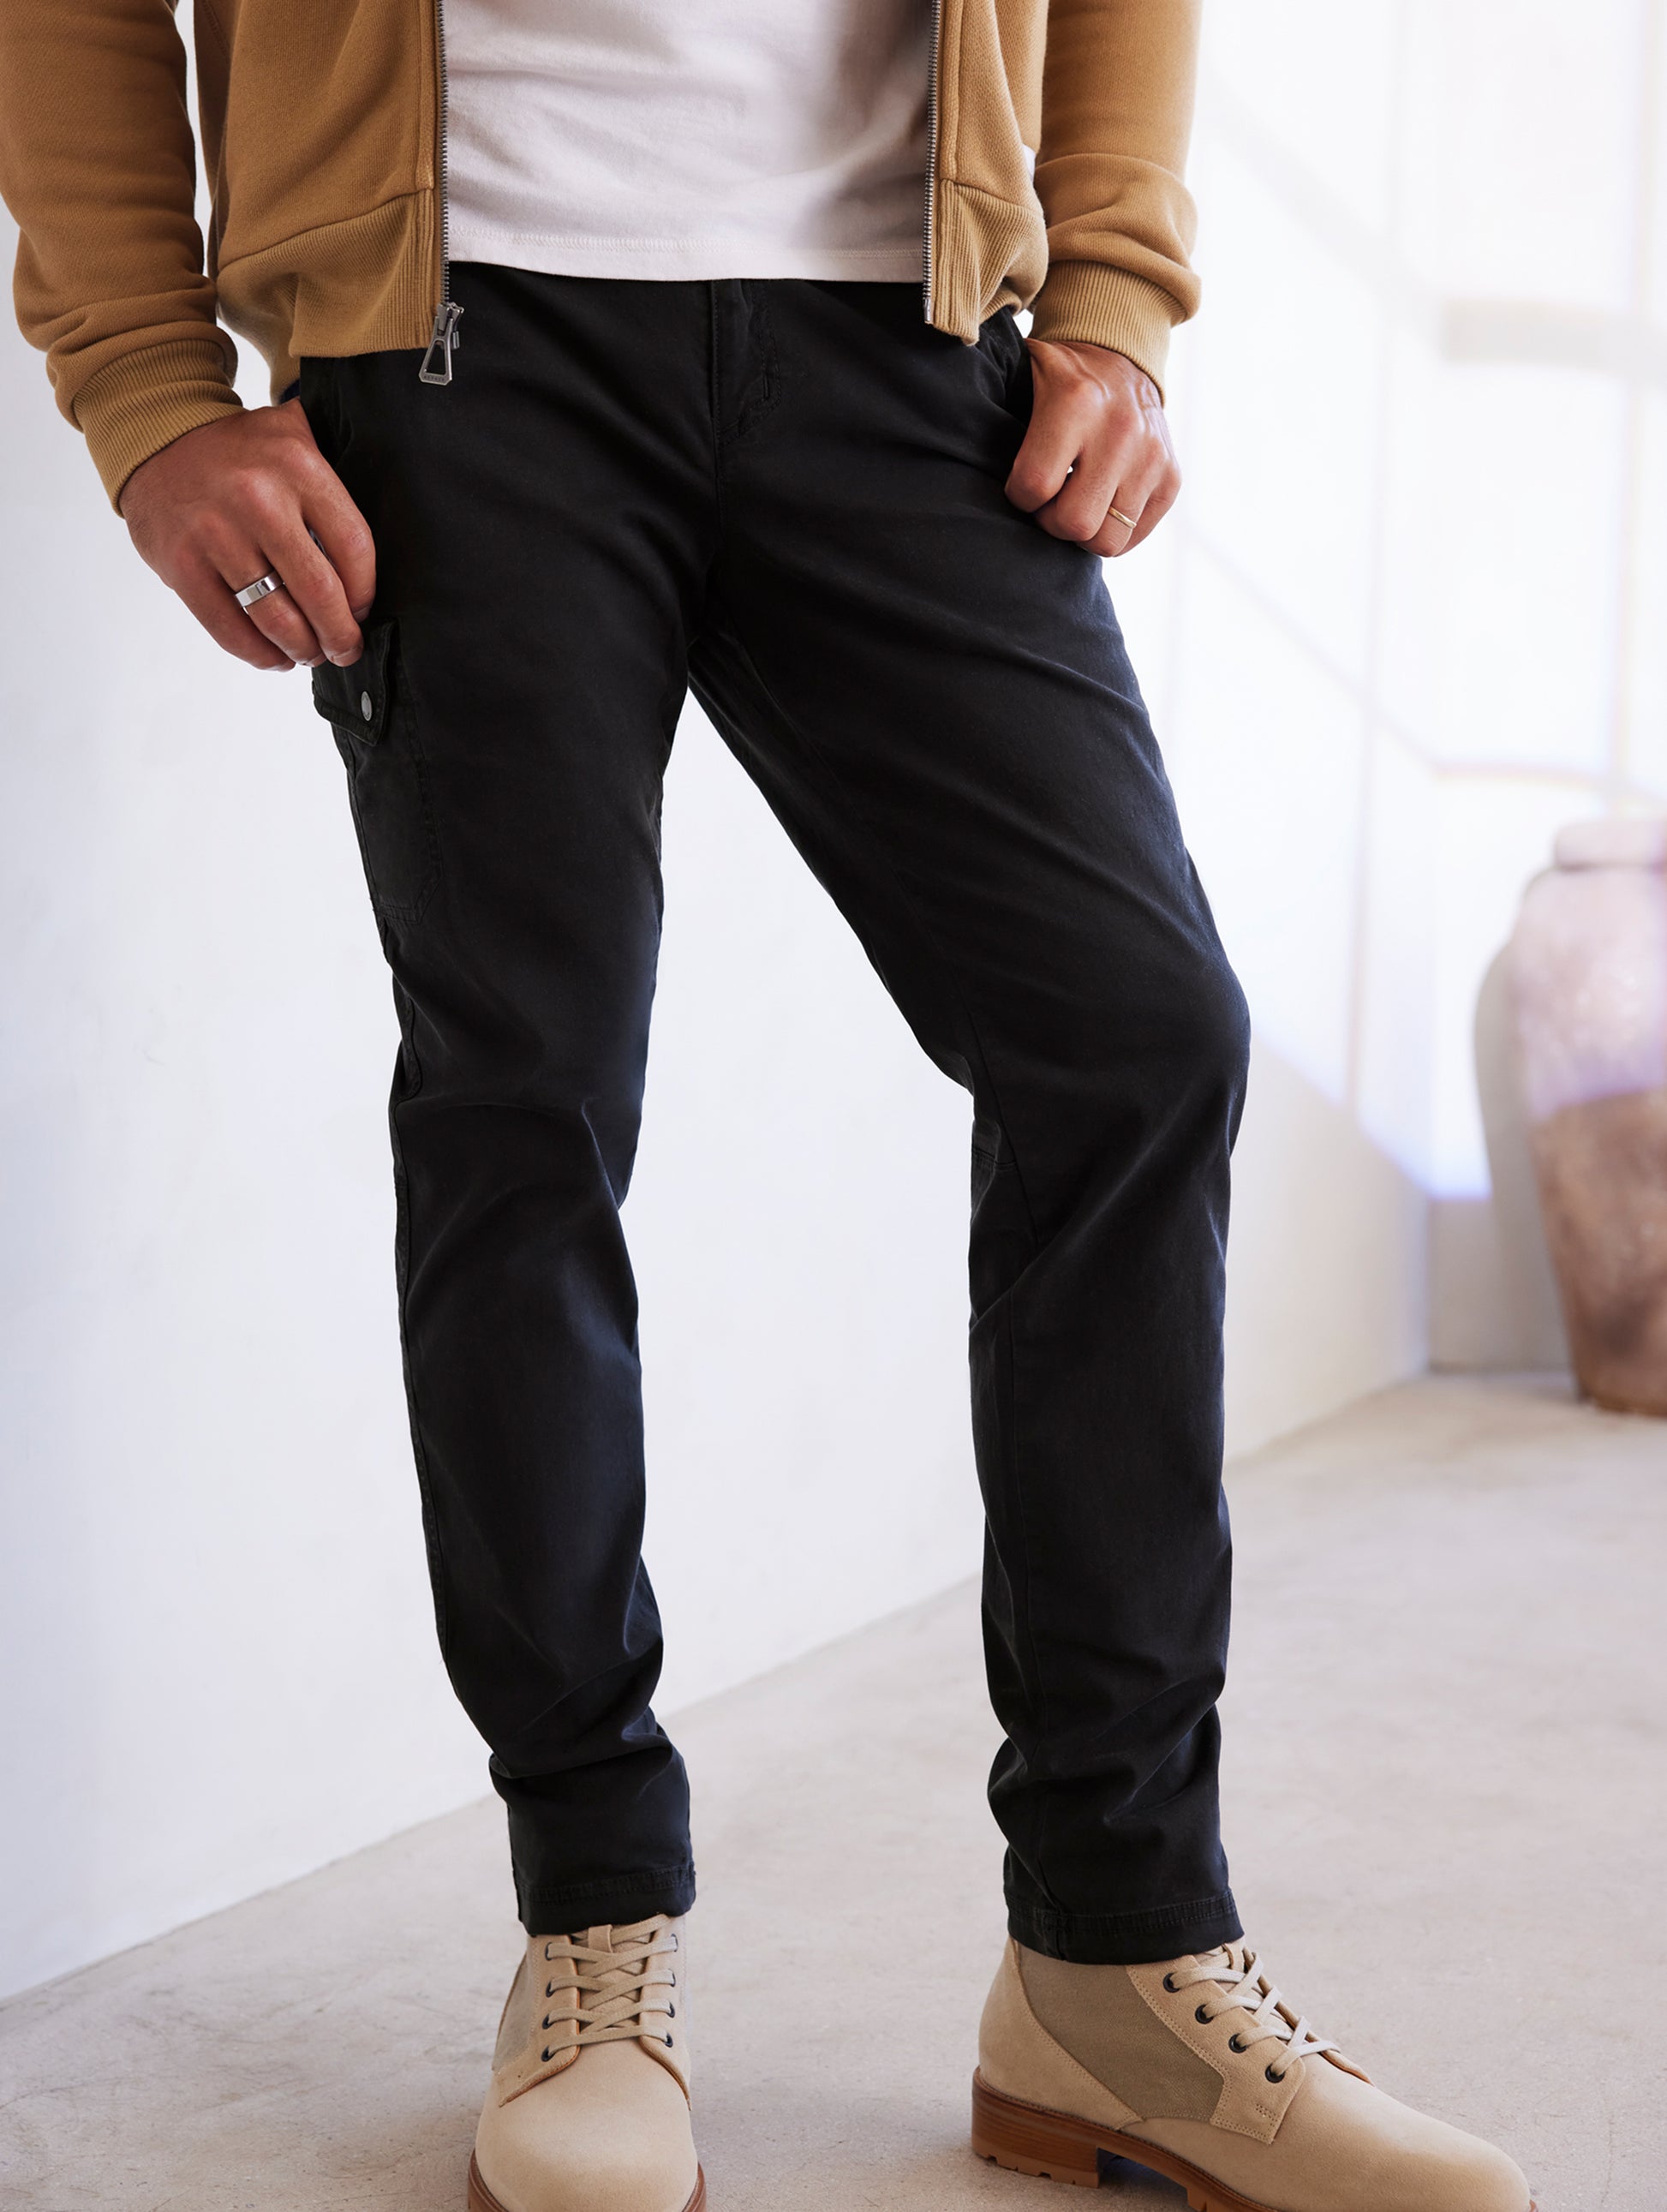 man wearing black pants from AETHER Apparel